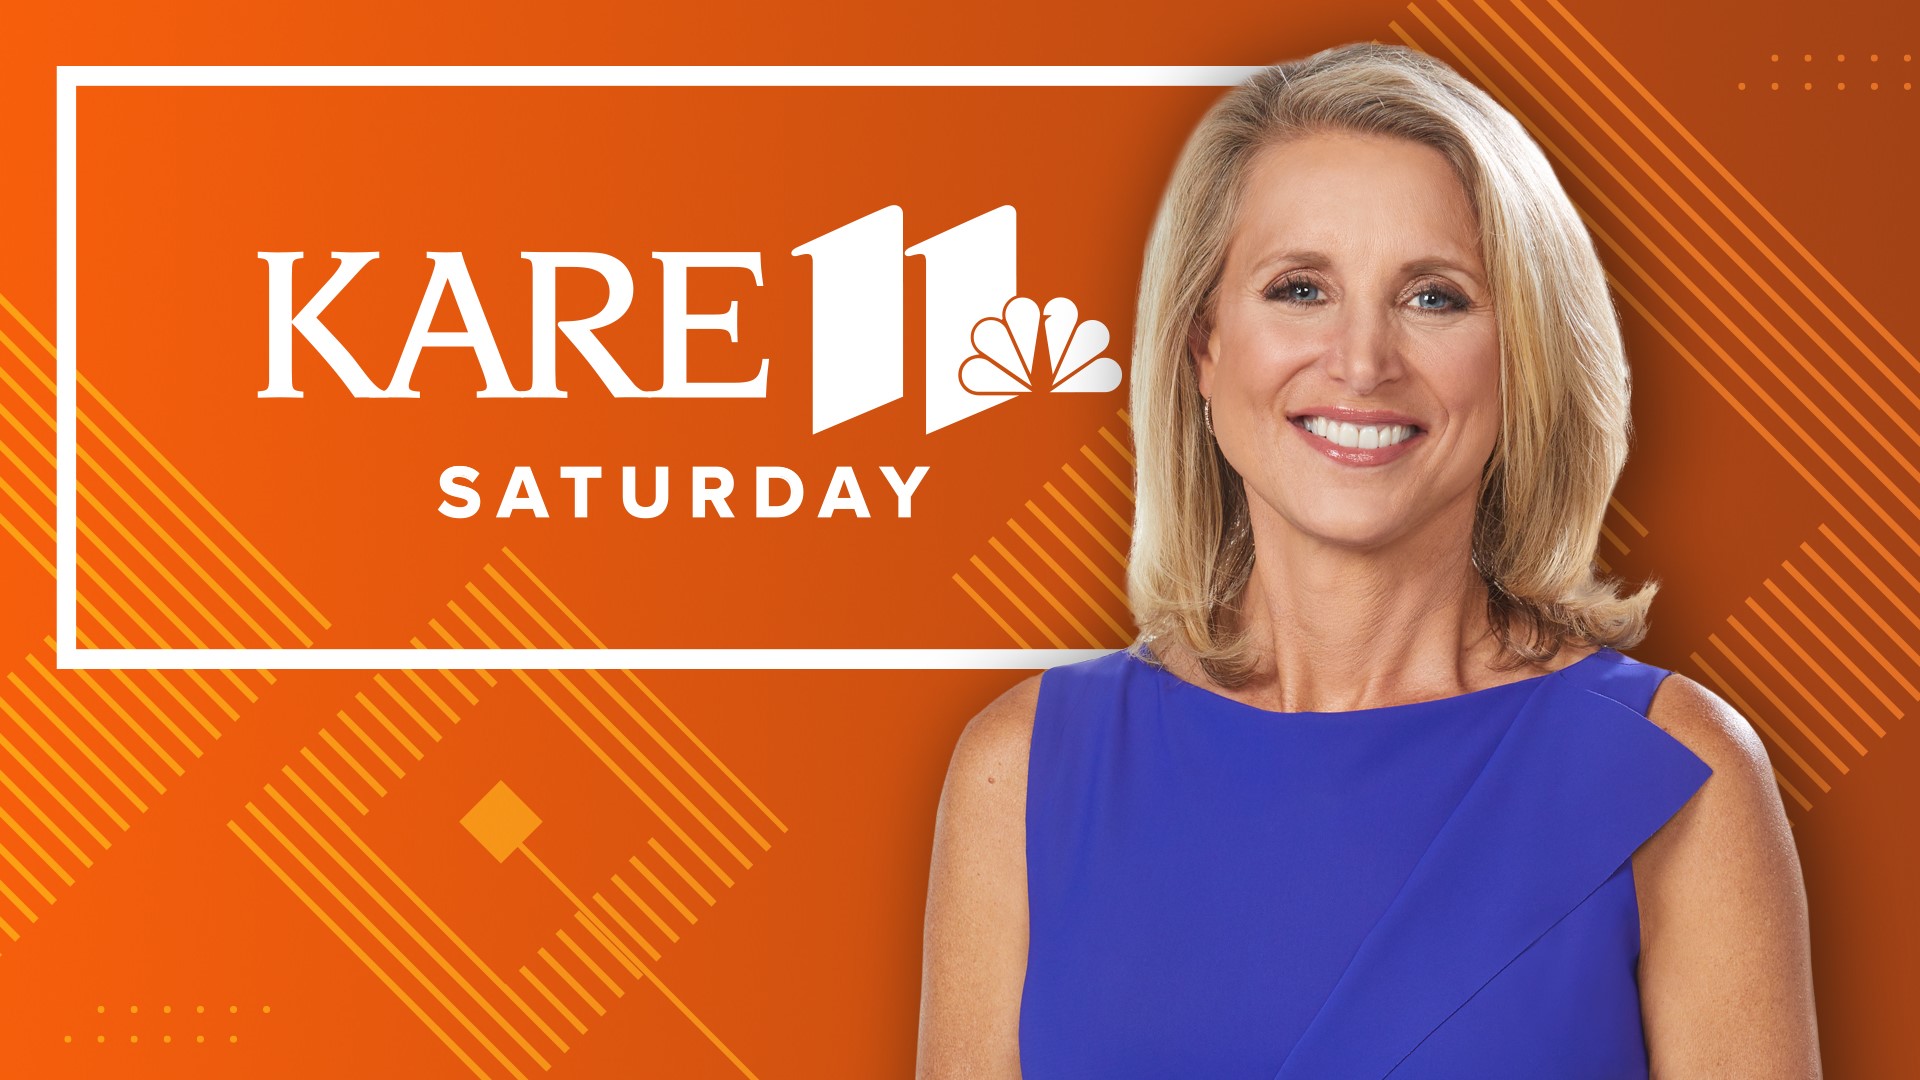 News and features for your weekend, including guest interviews, recipe ideas, and Grow With KARE.